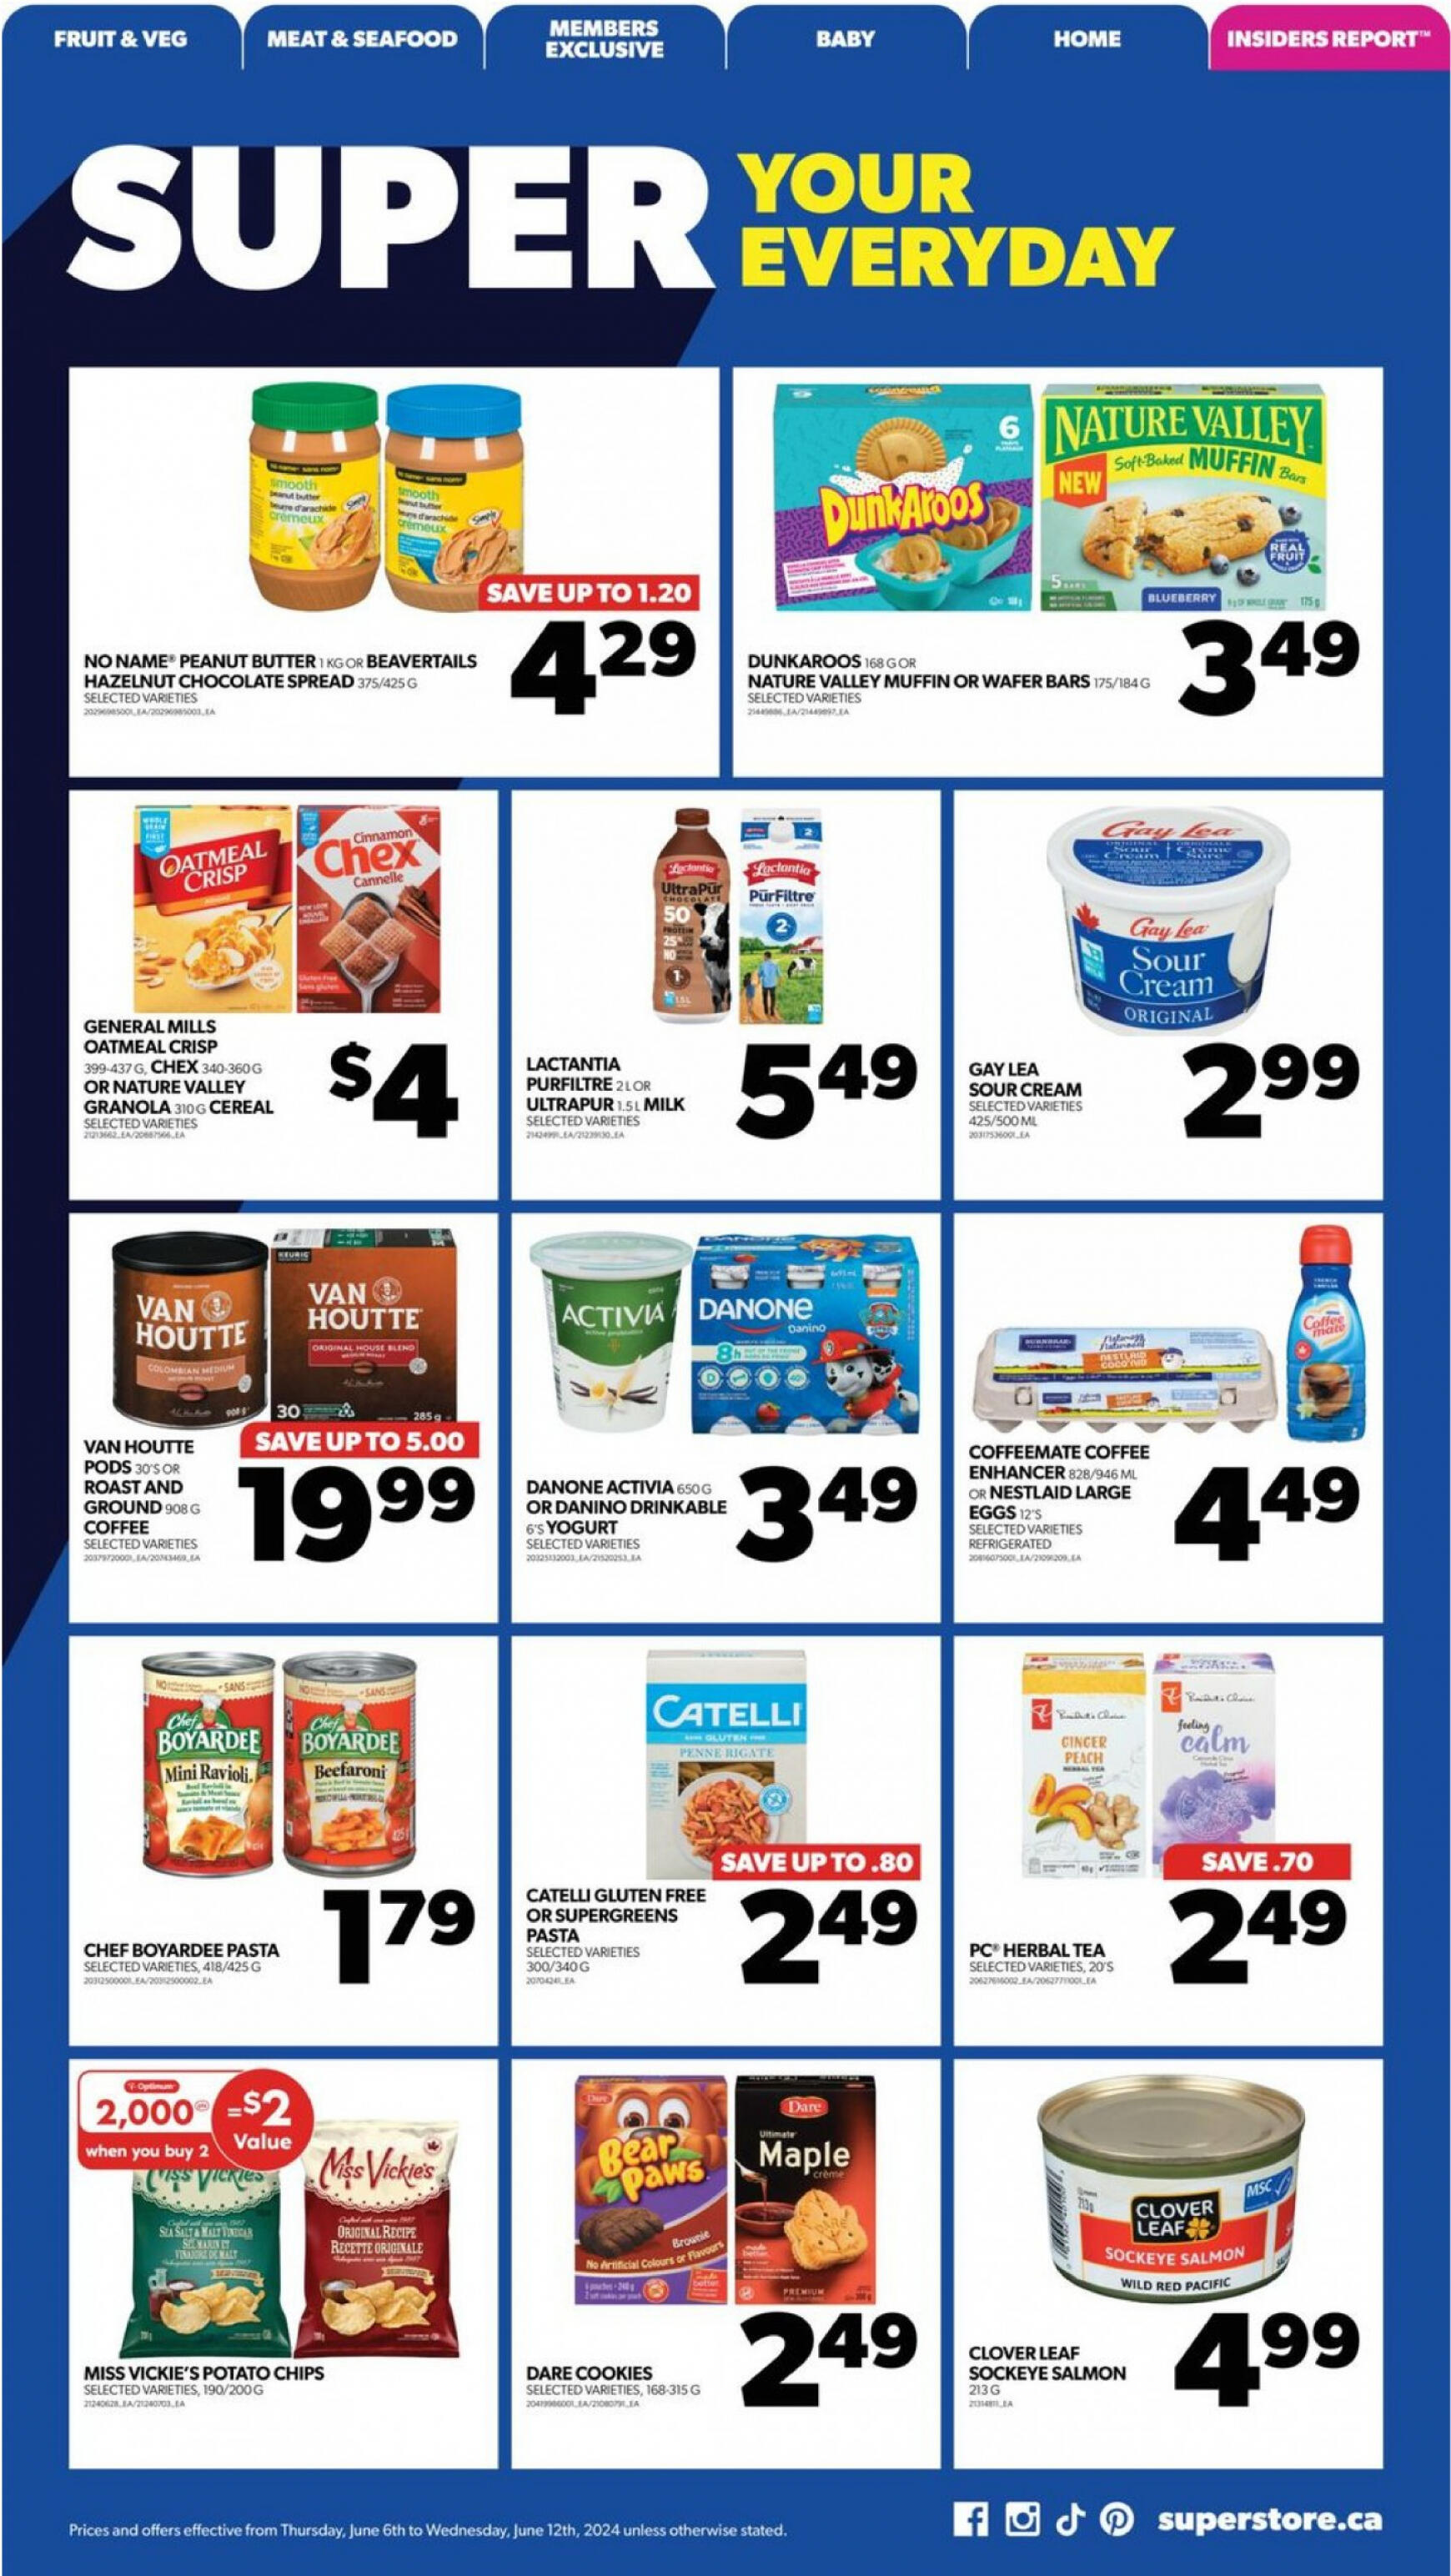 real-canadian-superstore - Real Canadian Superstore flyer current 06.06. - 12.06. - page: 15